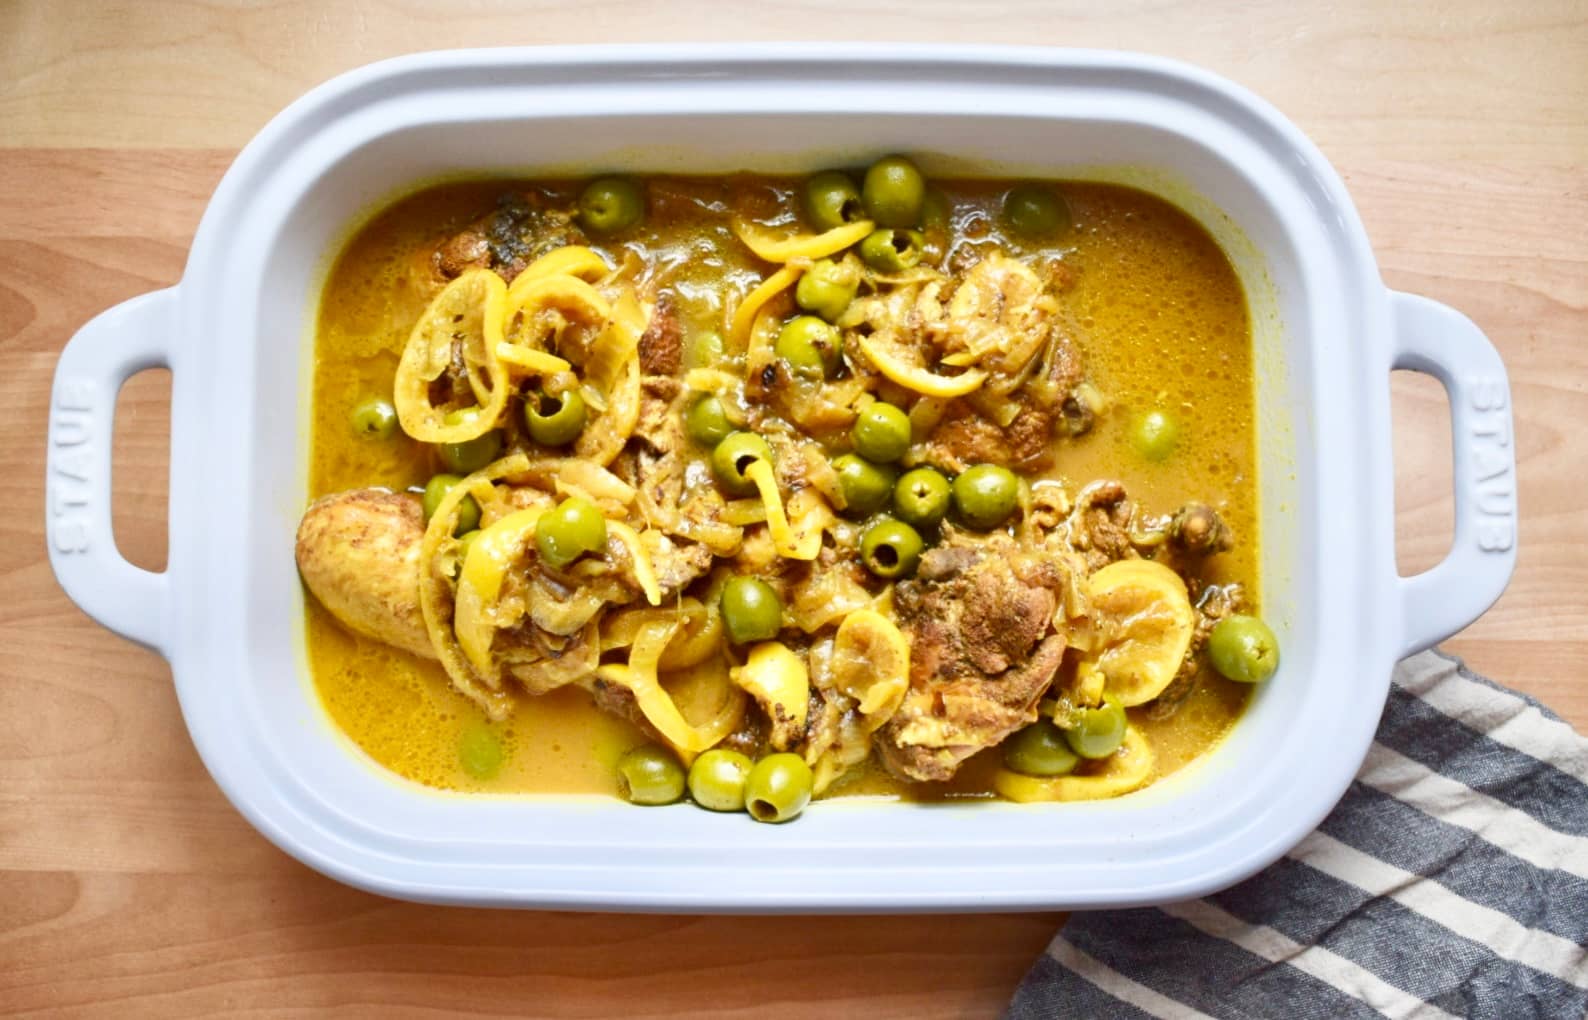 Moroccan-spiced chicken covered in lemons and olives in a white serving tray with golden juices